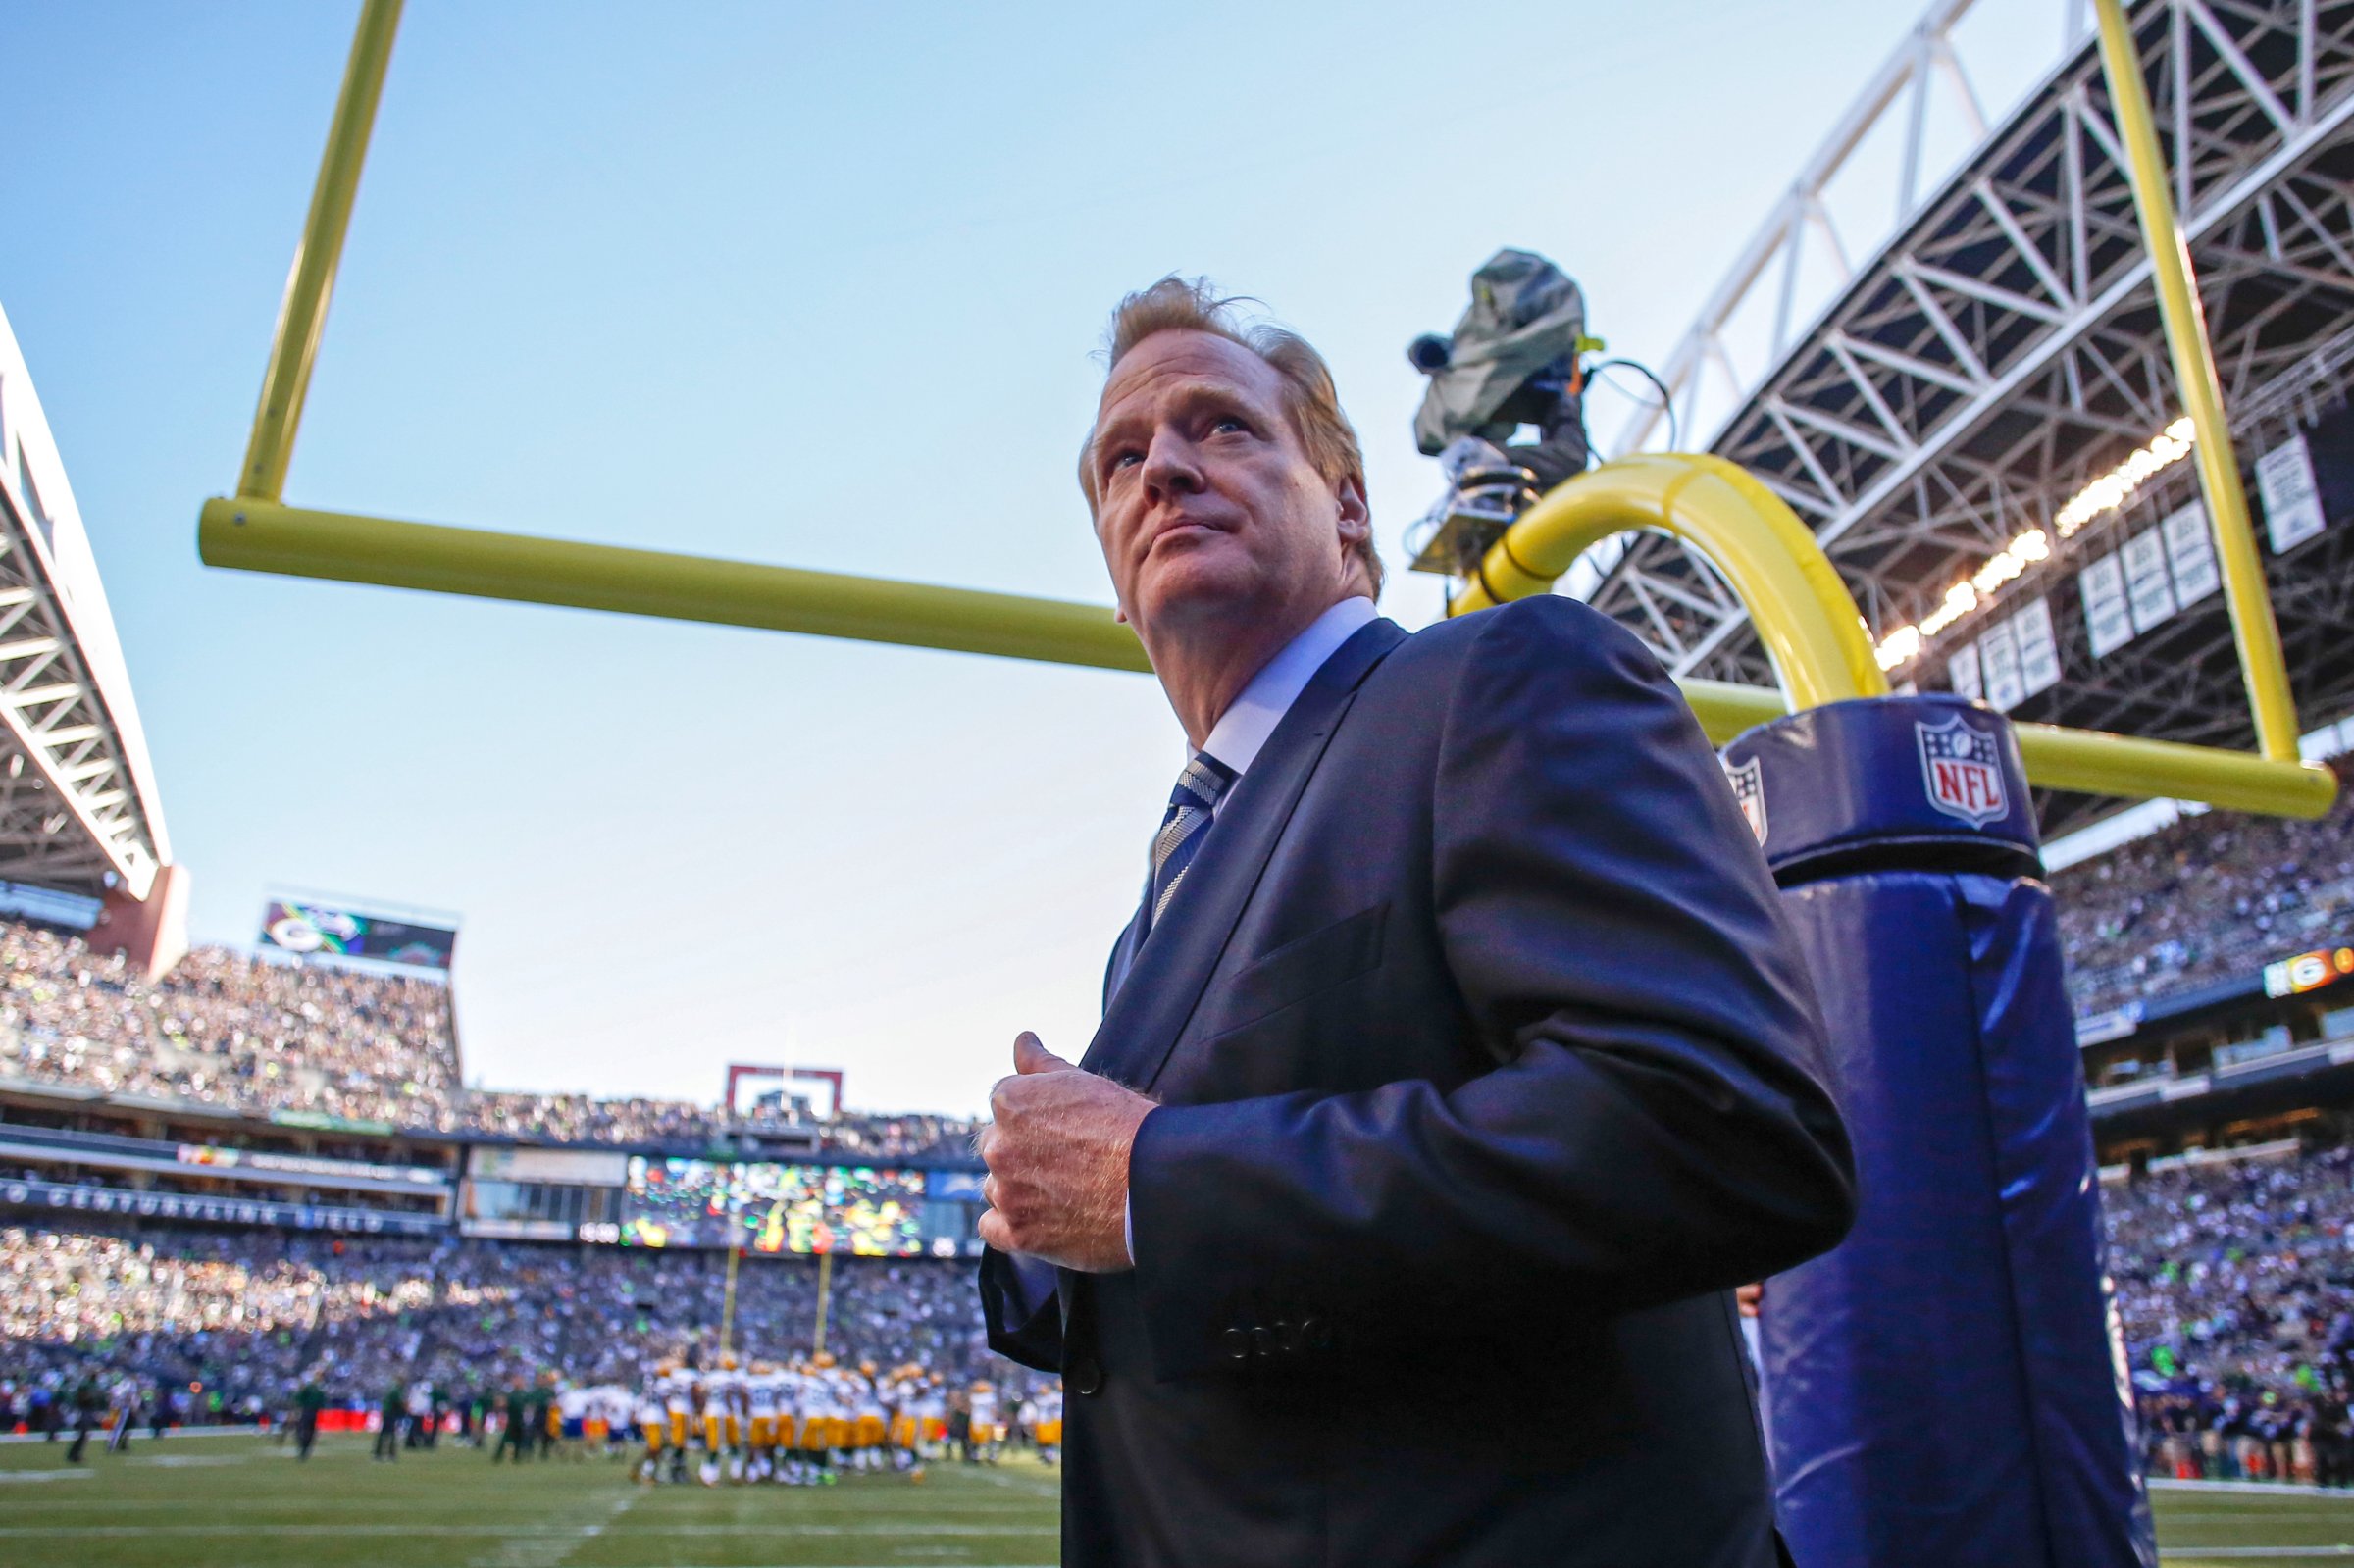 NFL commissioner Roger Goodell walks the sidelines prior to the game between the Seattle Seahawks and the Green Bay Packers at CenturyLink Field on September 4, 2014 in Seattle, Washington.